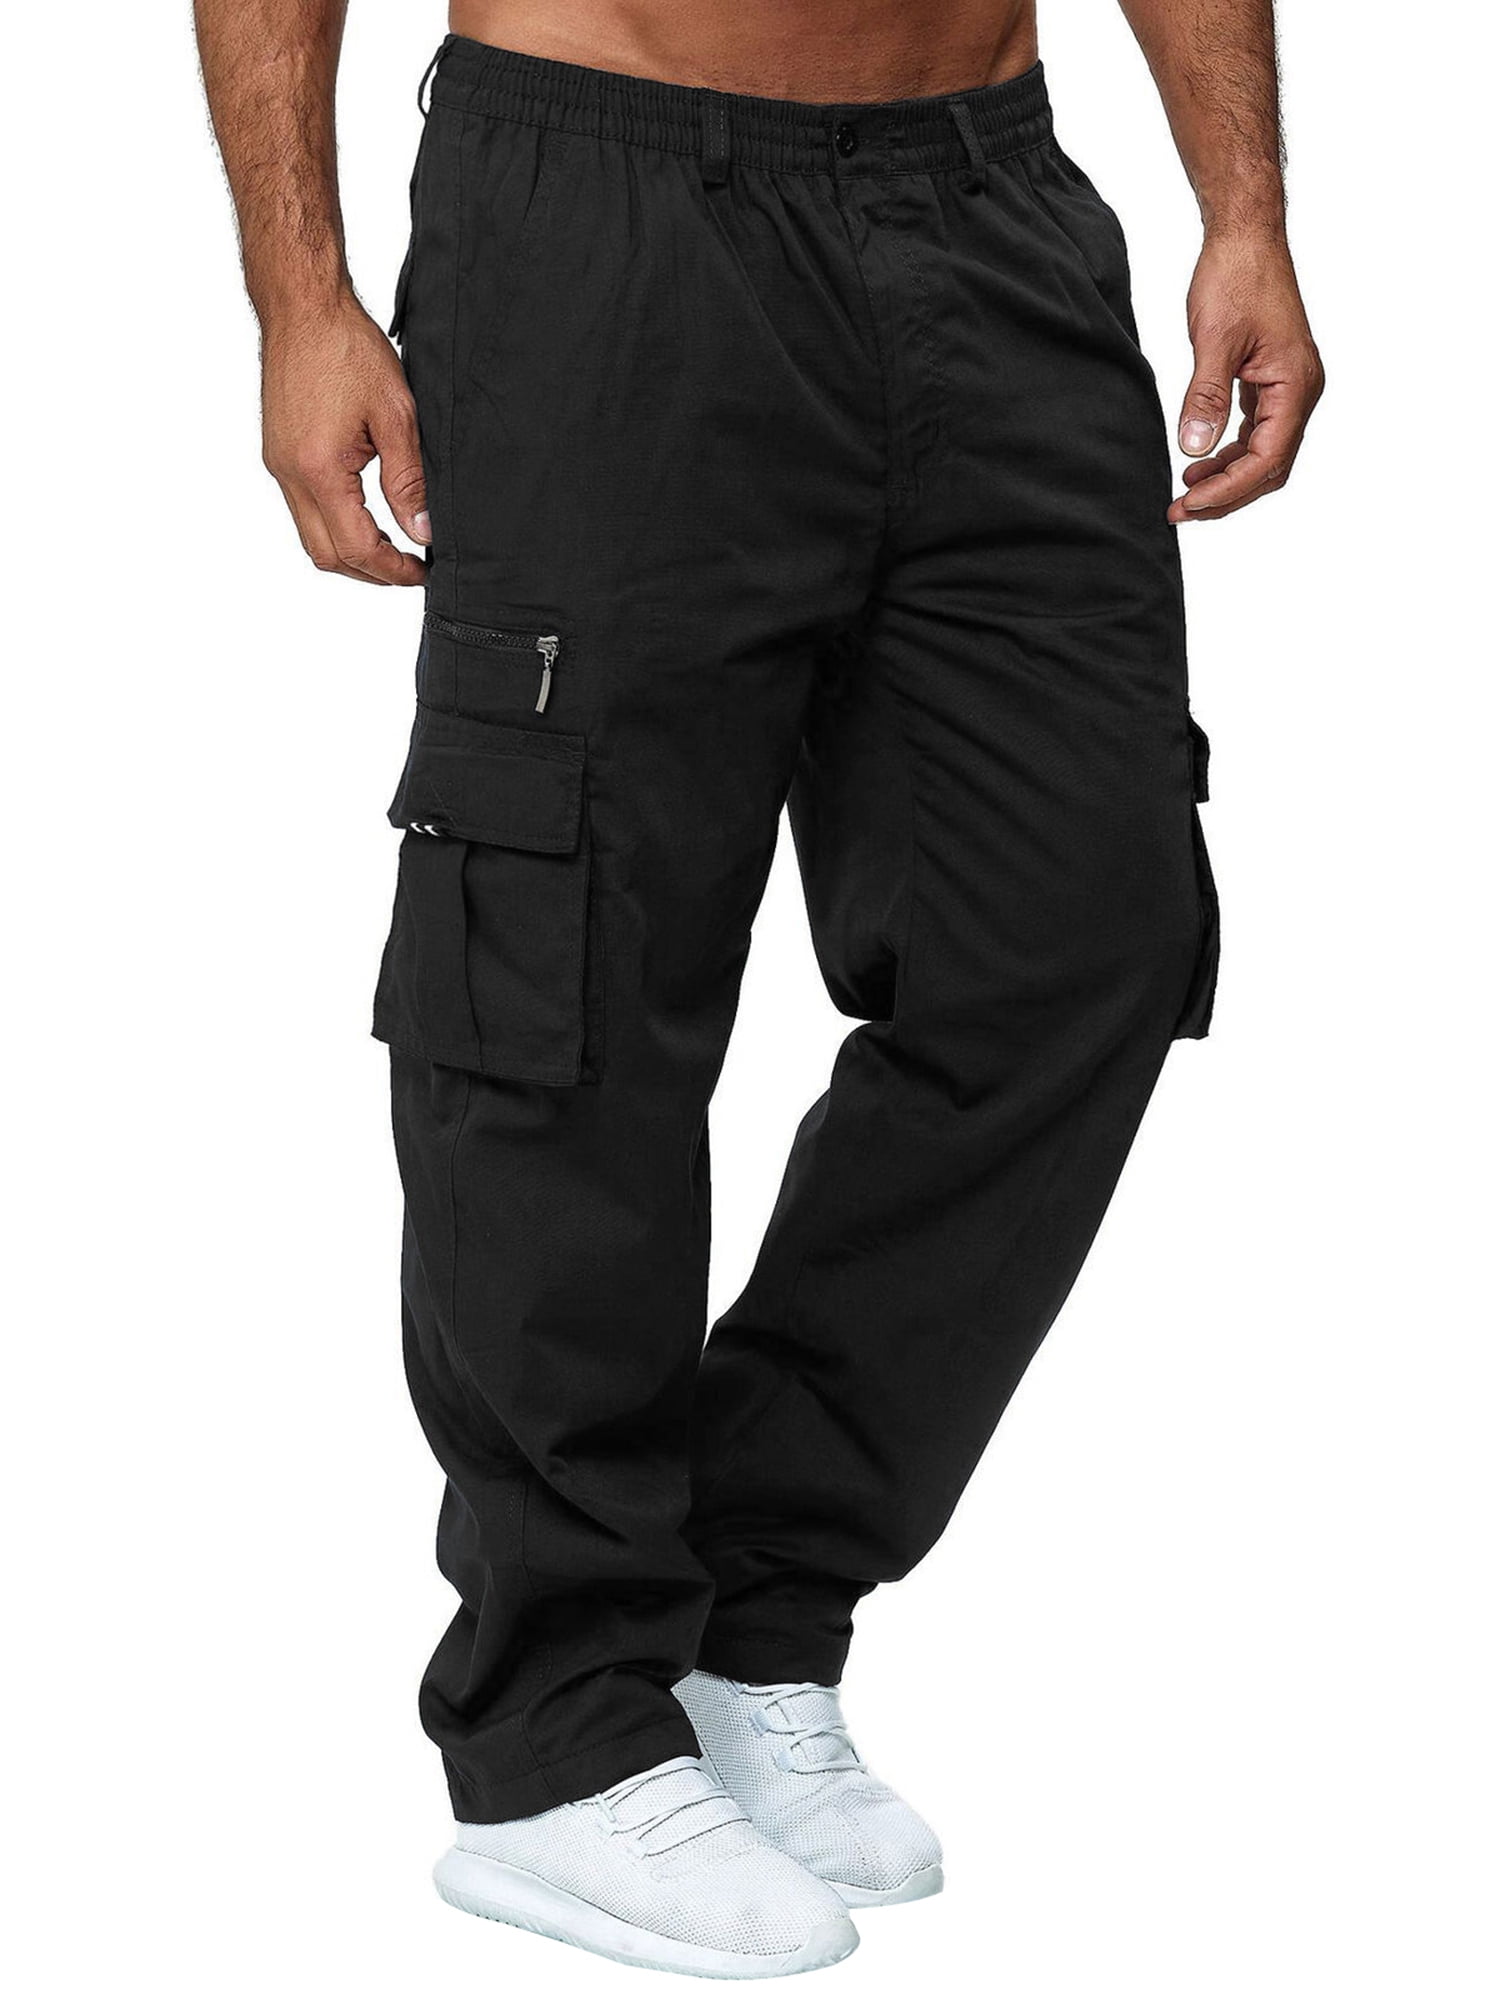 wybzd Men Casual Loose Straight Cargo Pants Elastic Waist Relaxed Fit  Straight Leg Trousers with Pockets Black M